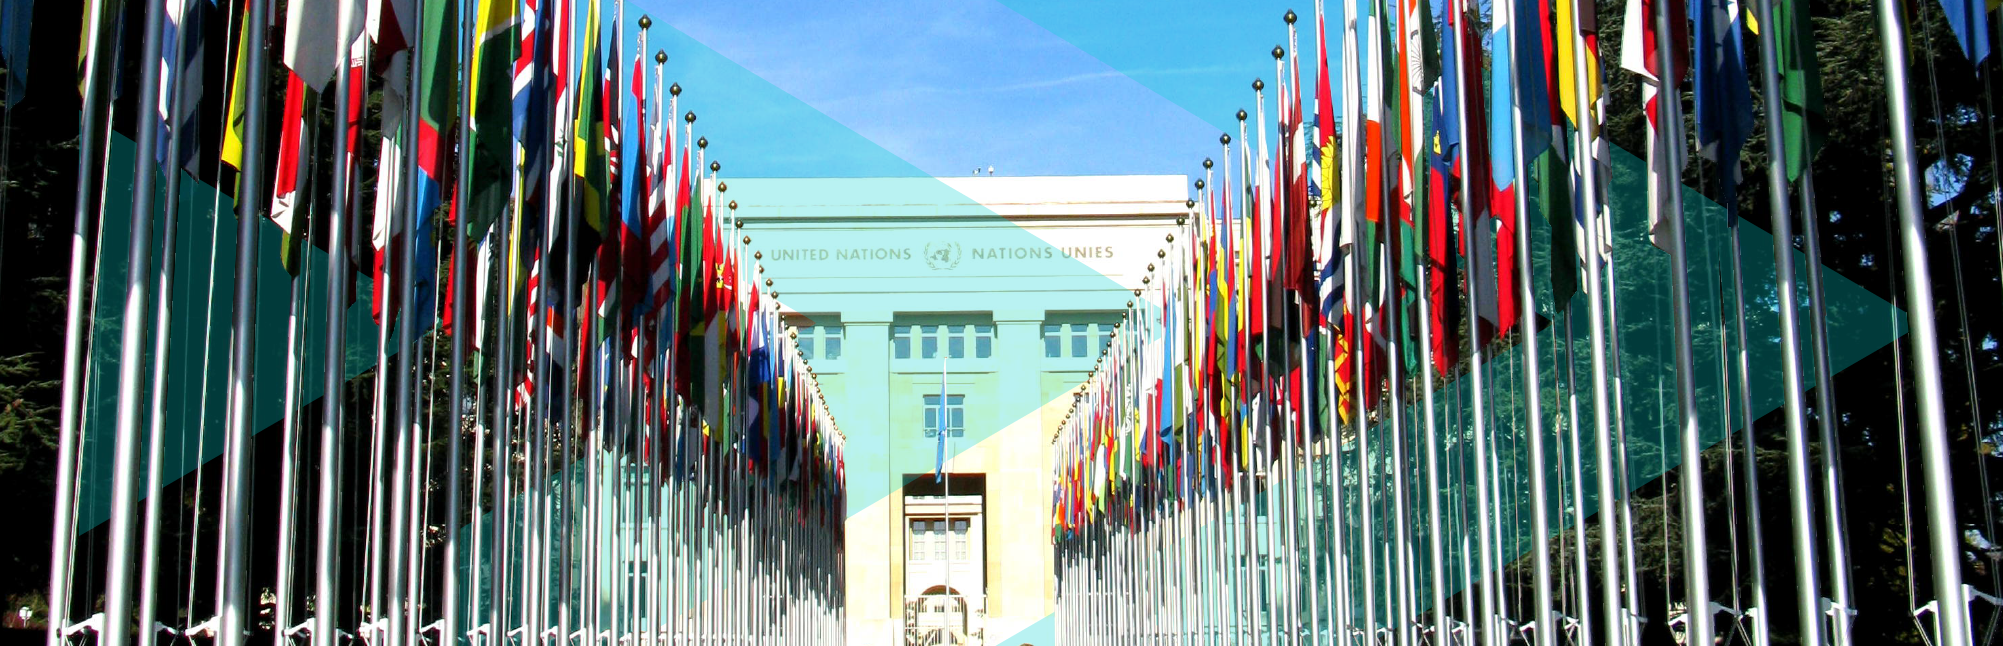 Alley of meber nation flags leading up to UN Building in Geneva, blue skies